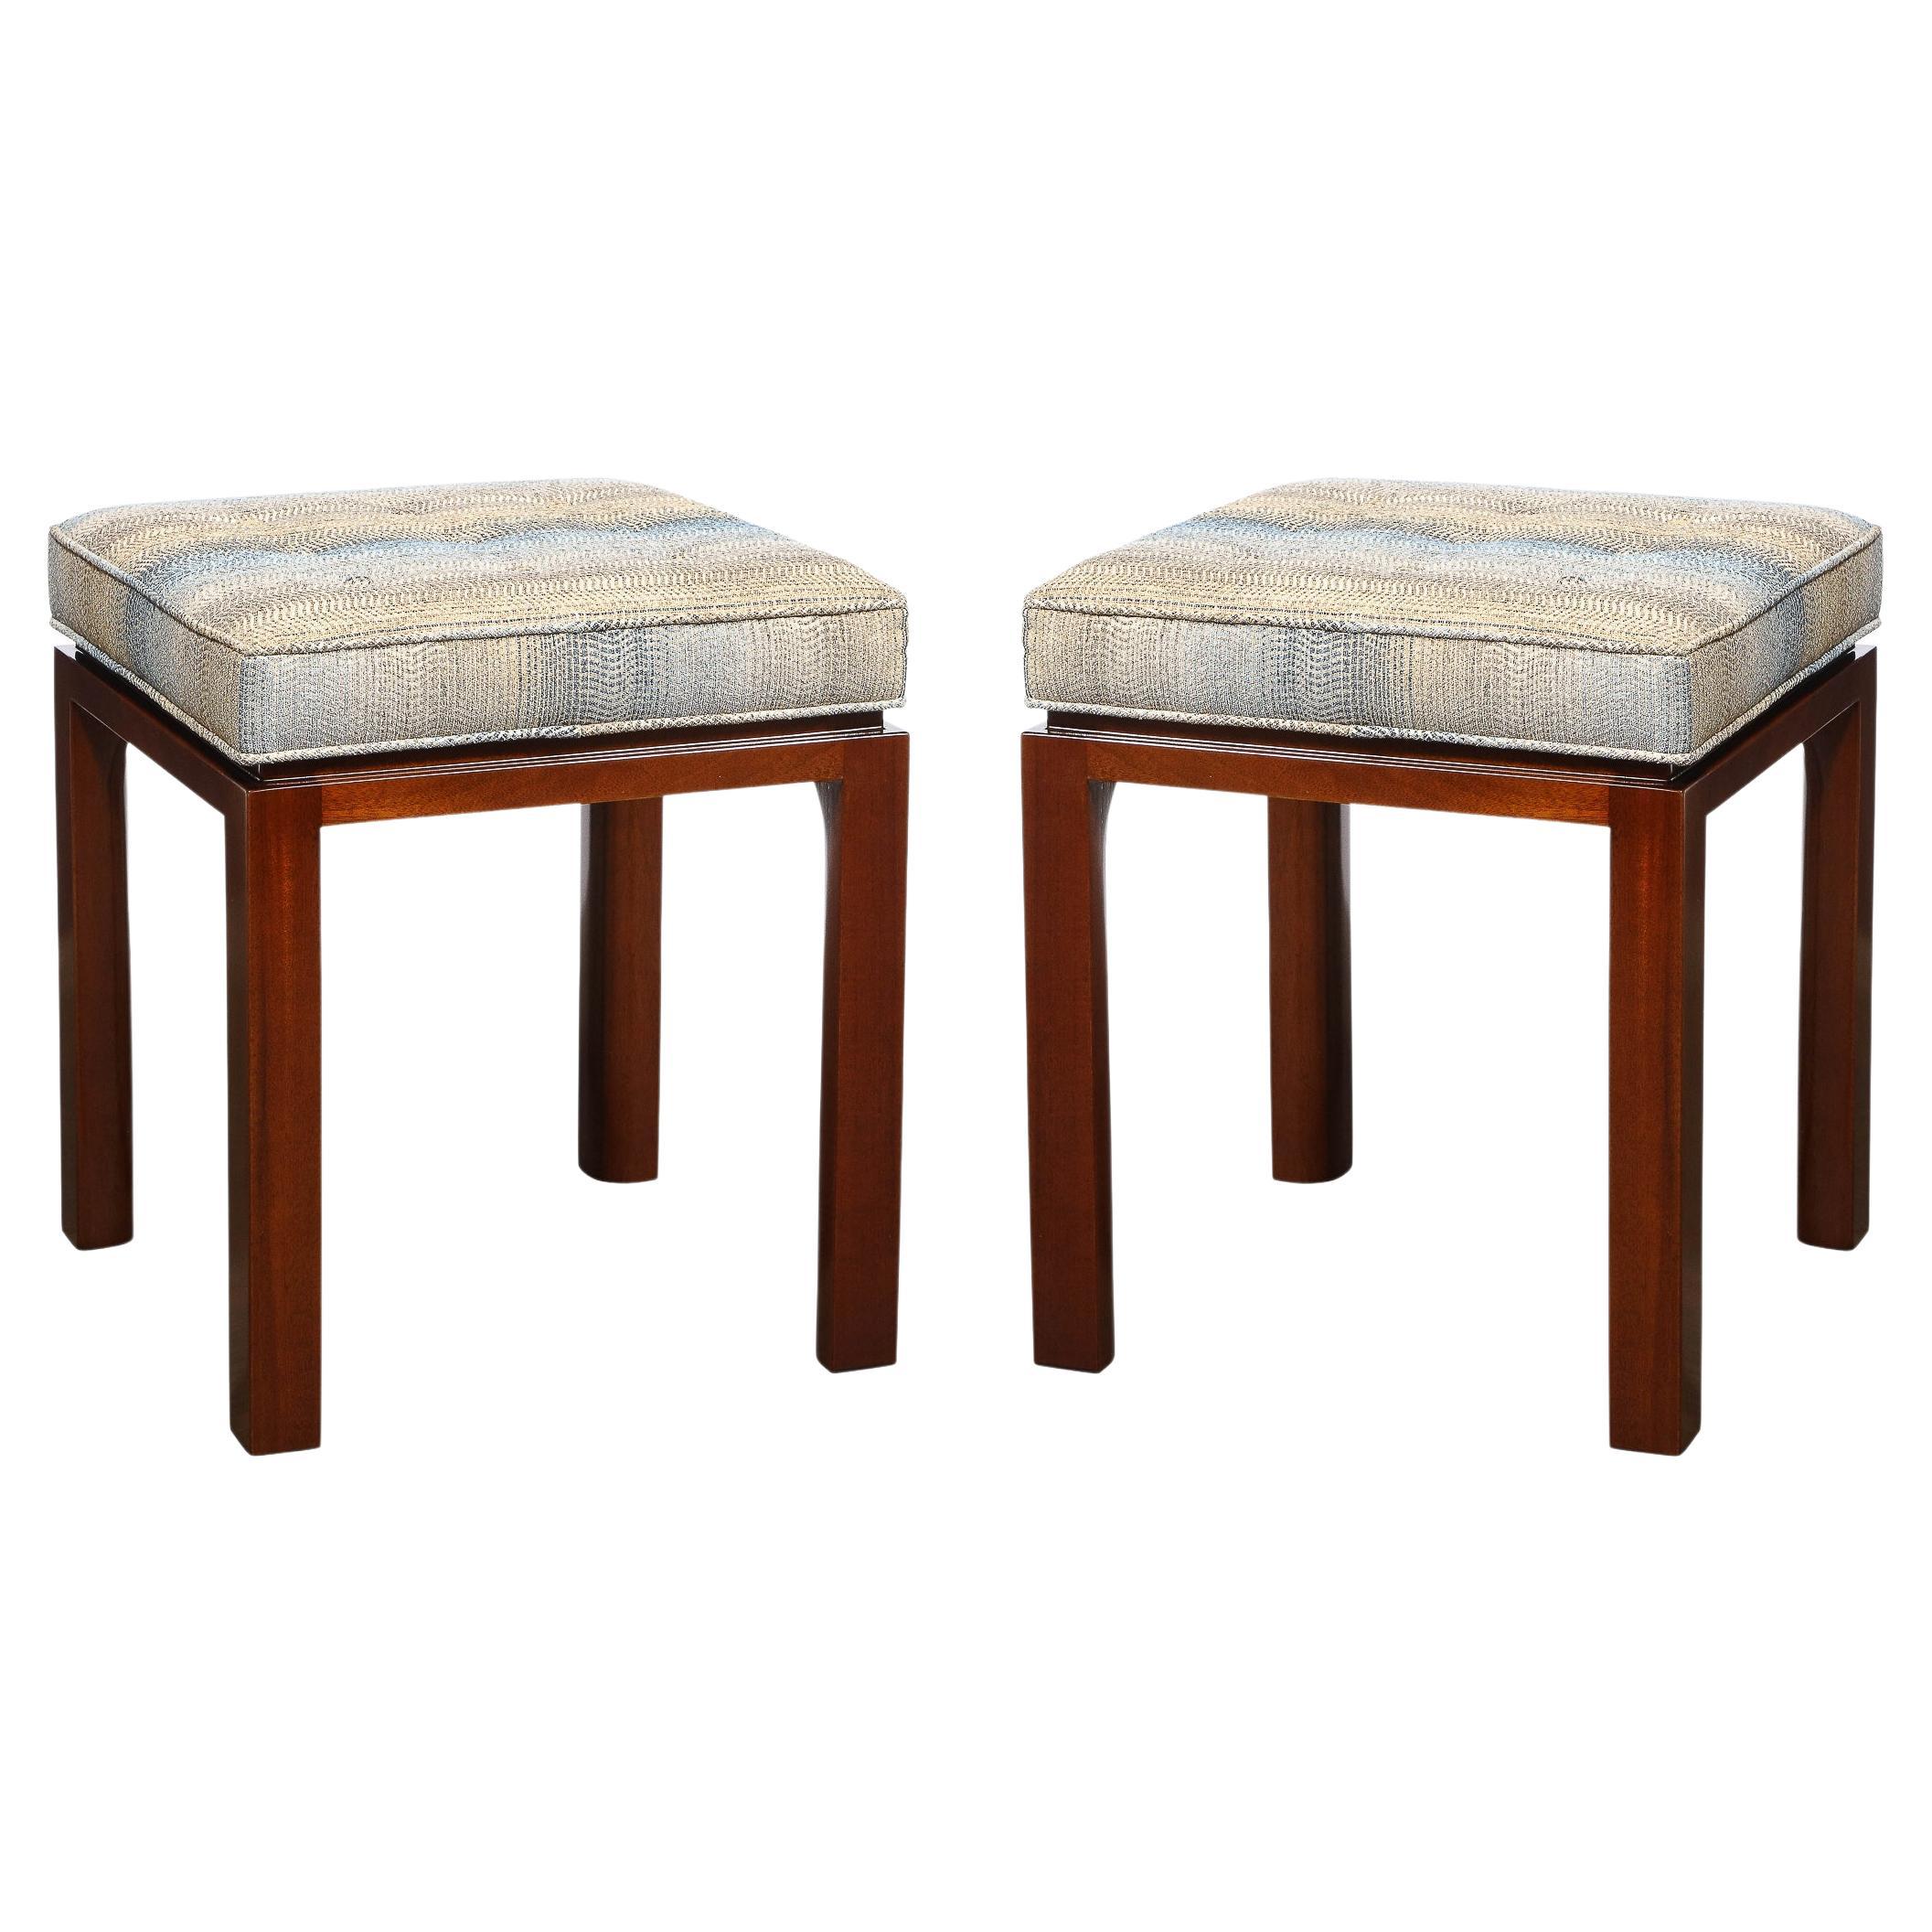 Pair of Mid-Century Modernist Stools with Button Detailing by Harvey Probber